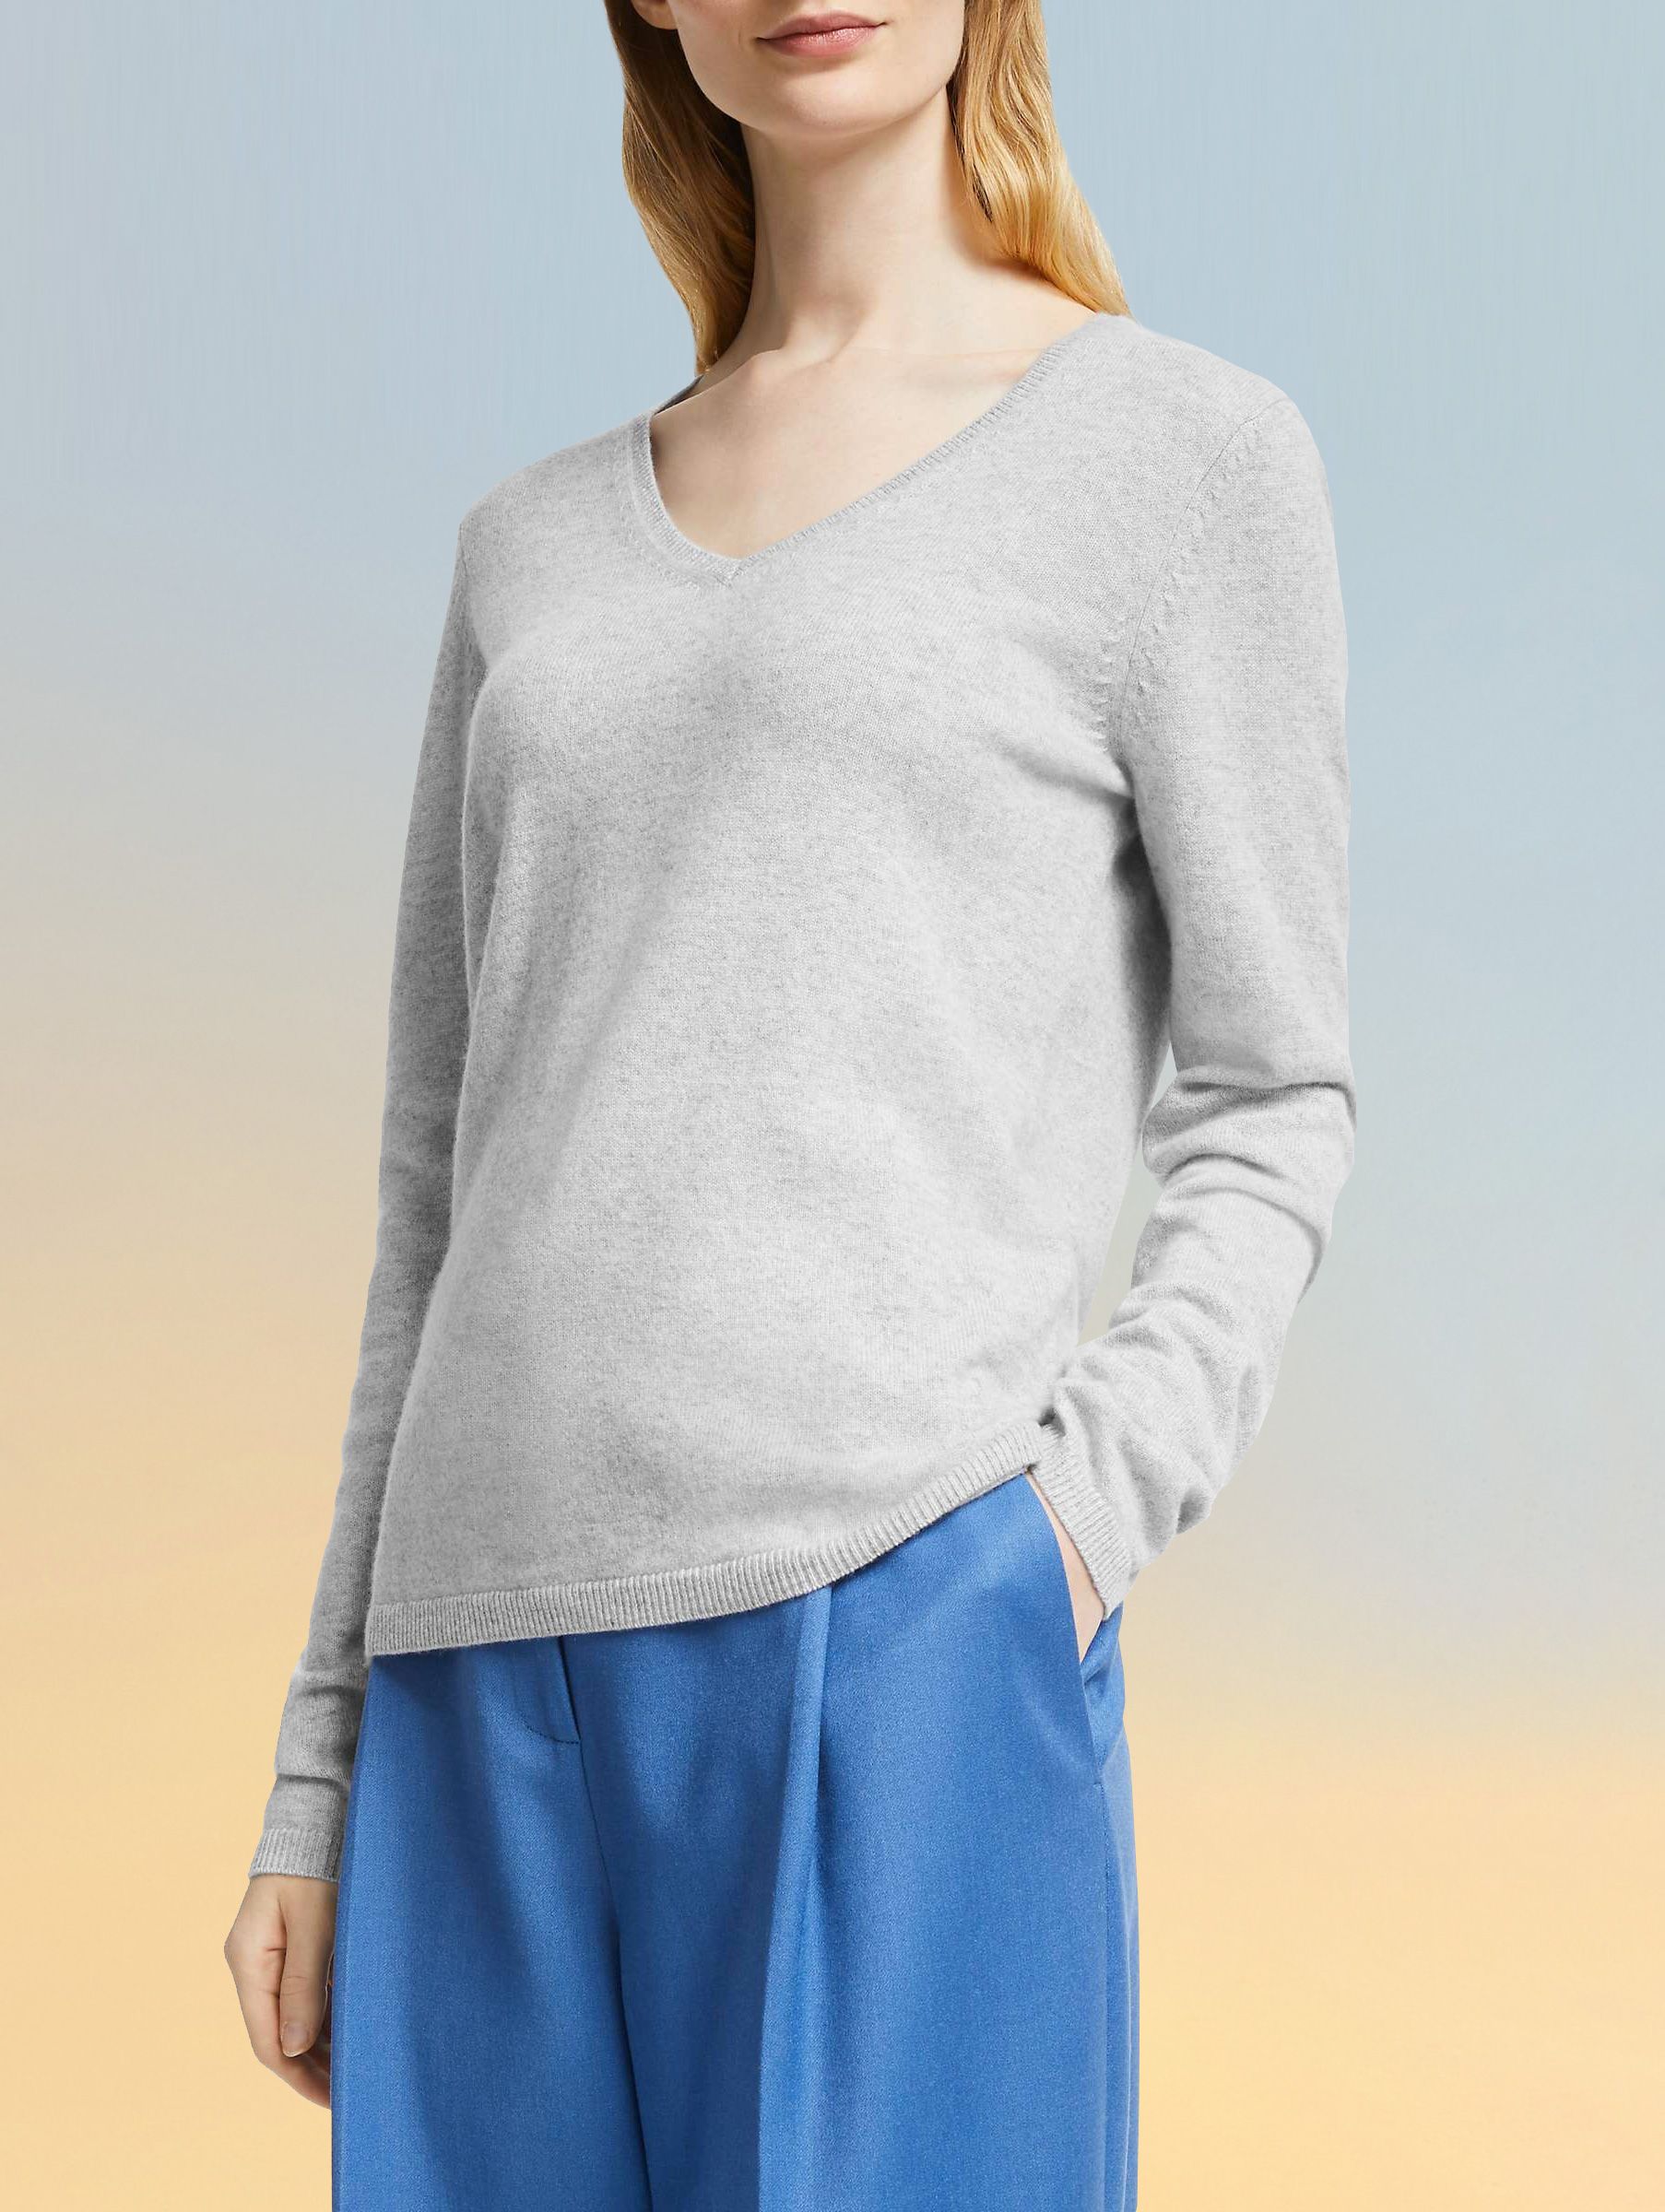 Top ten Mother's Day- The Cashmere Sweater